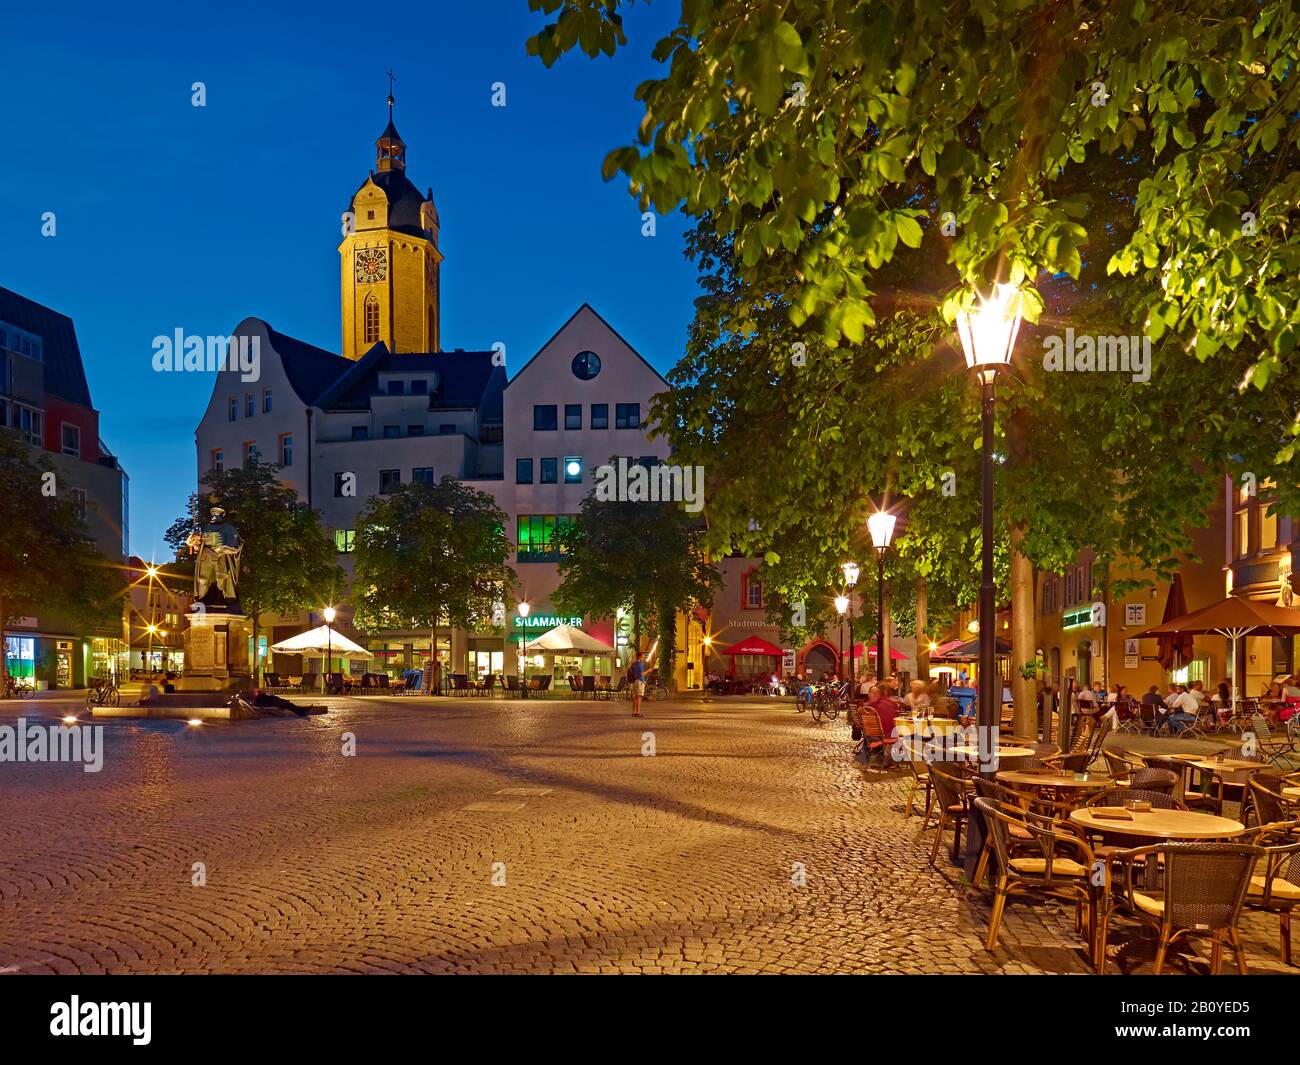 Market with St. Michael town church in Jena, Thuringia, Germany, Stock Photo